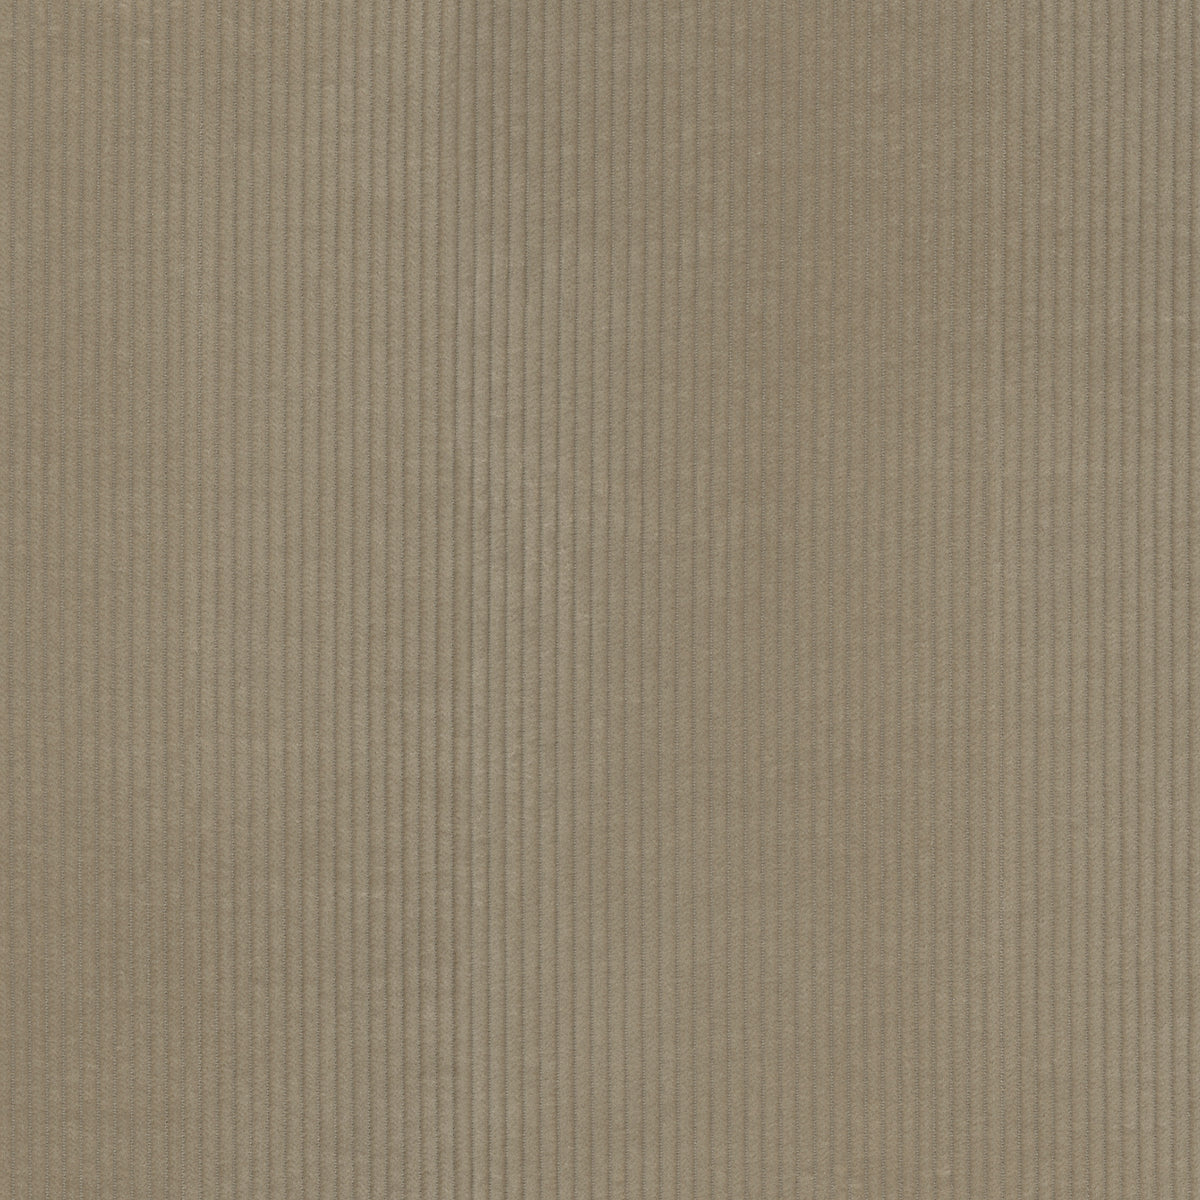 P/K Lifestyles Wales - Fawn 412046 Fabric Swatch